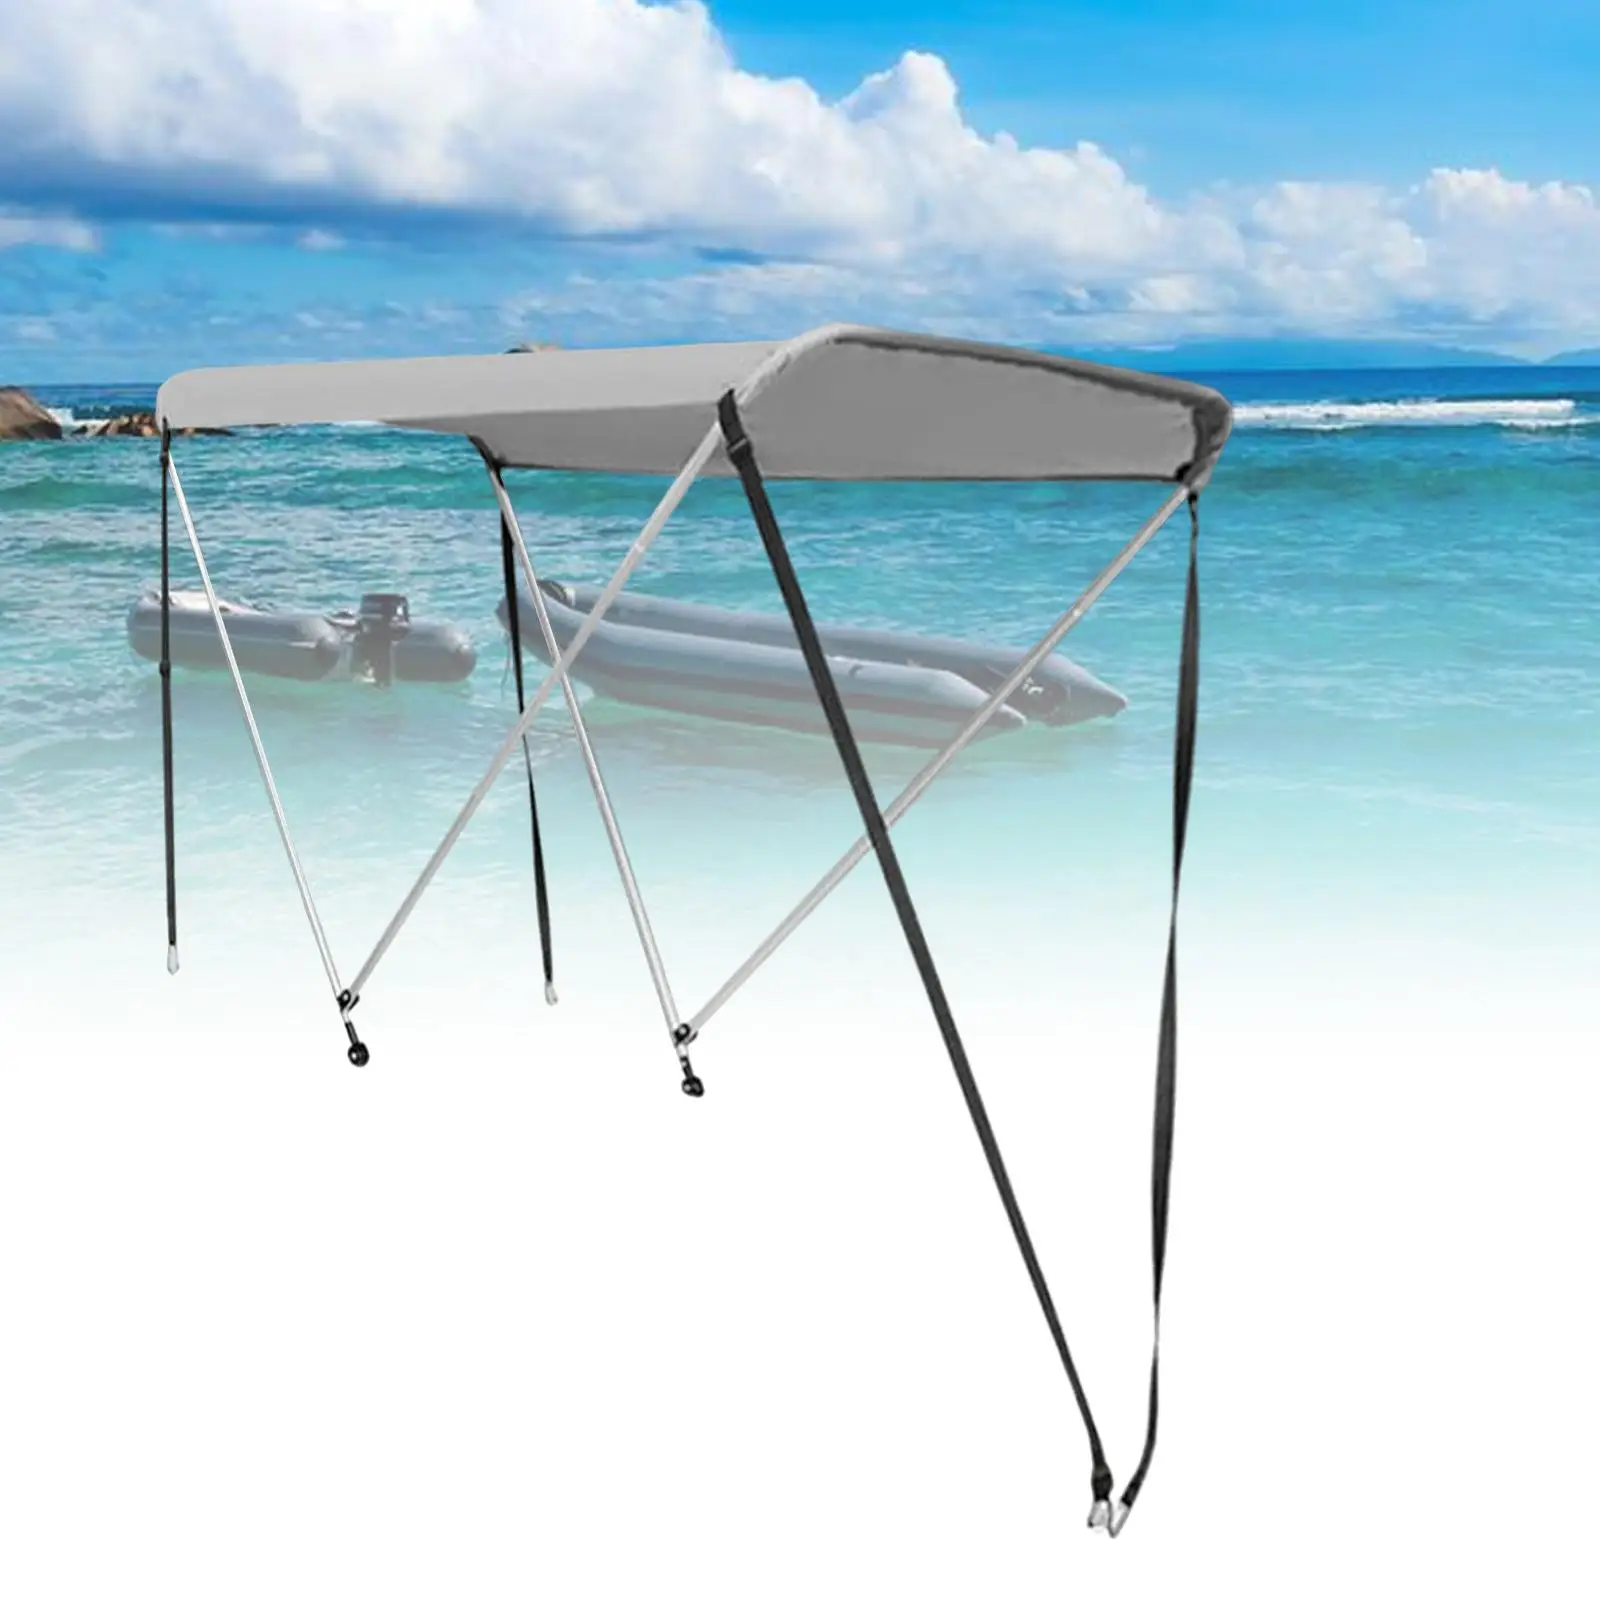 Foldable Inflatable Boat Canopy Kayak Anti- Shade Collapsible 